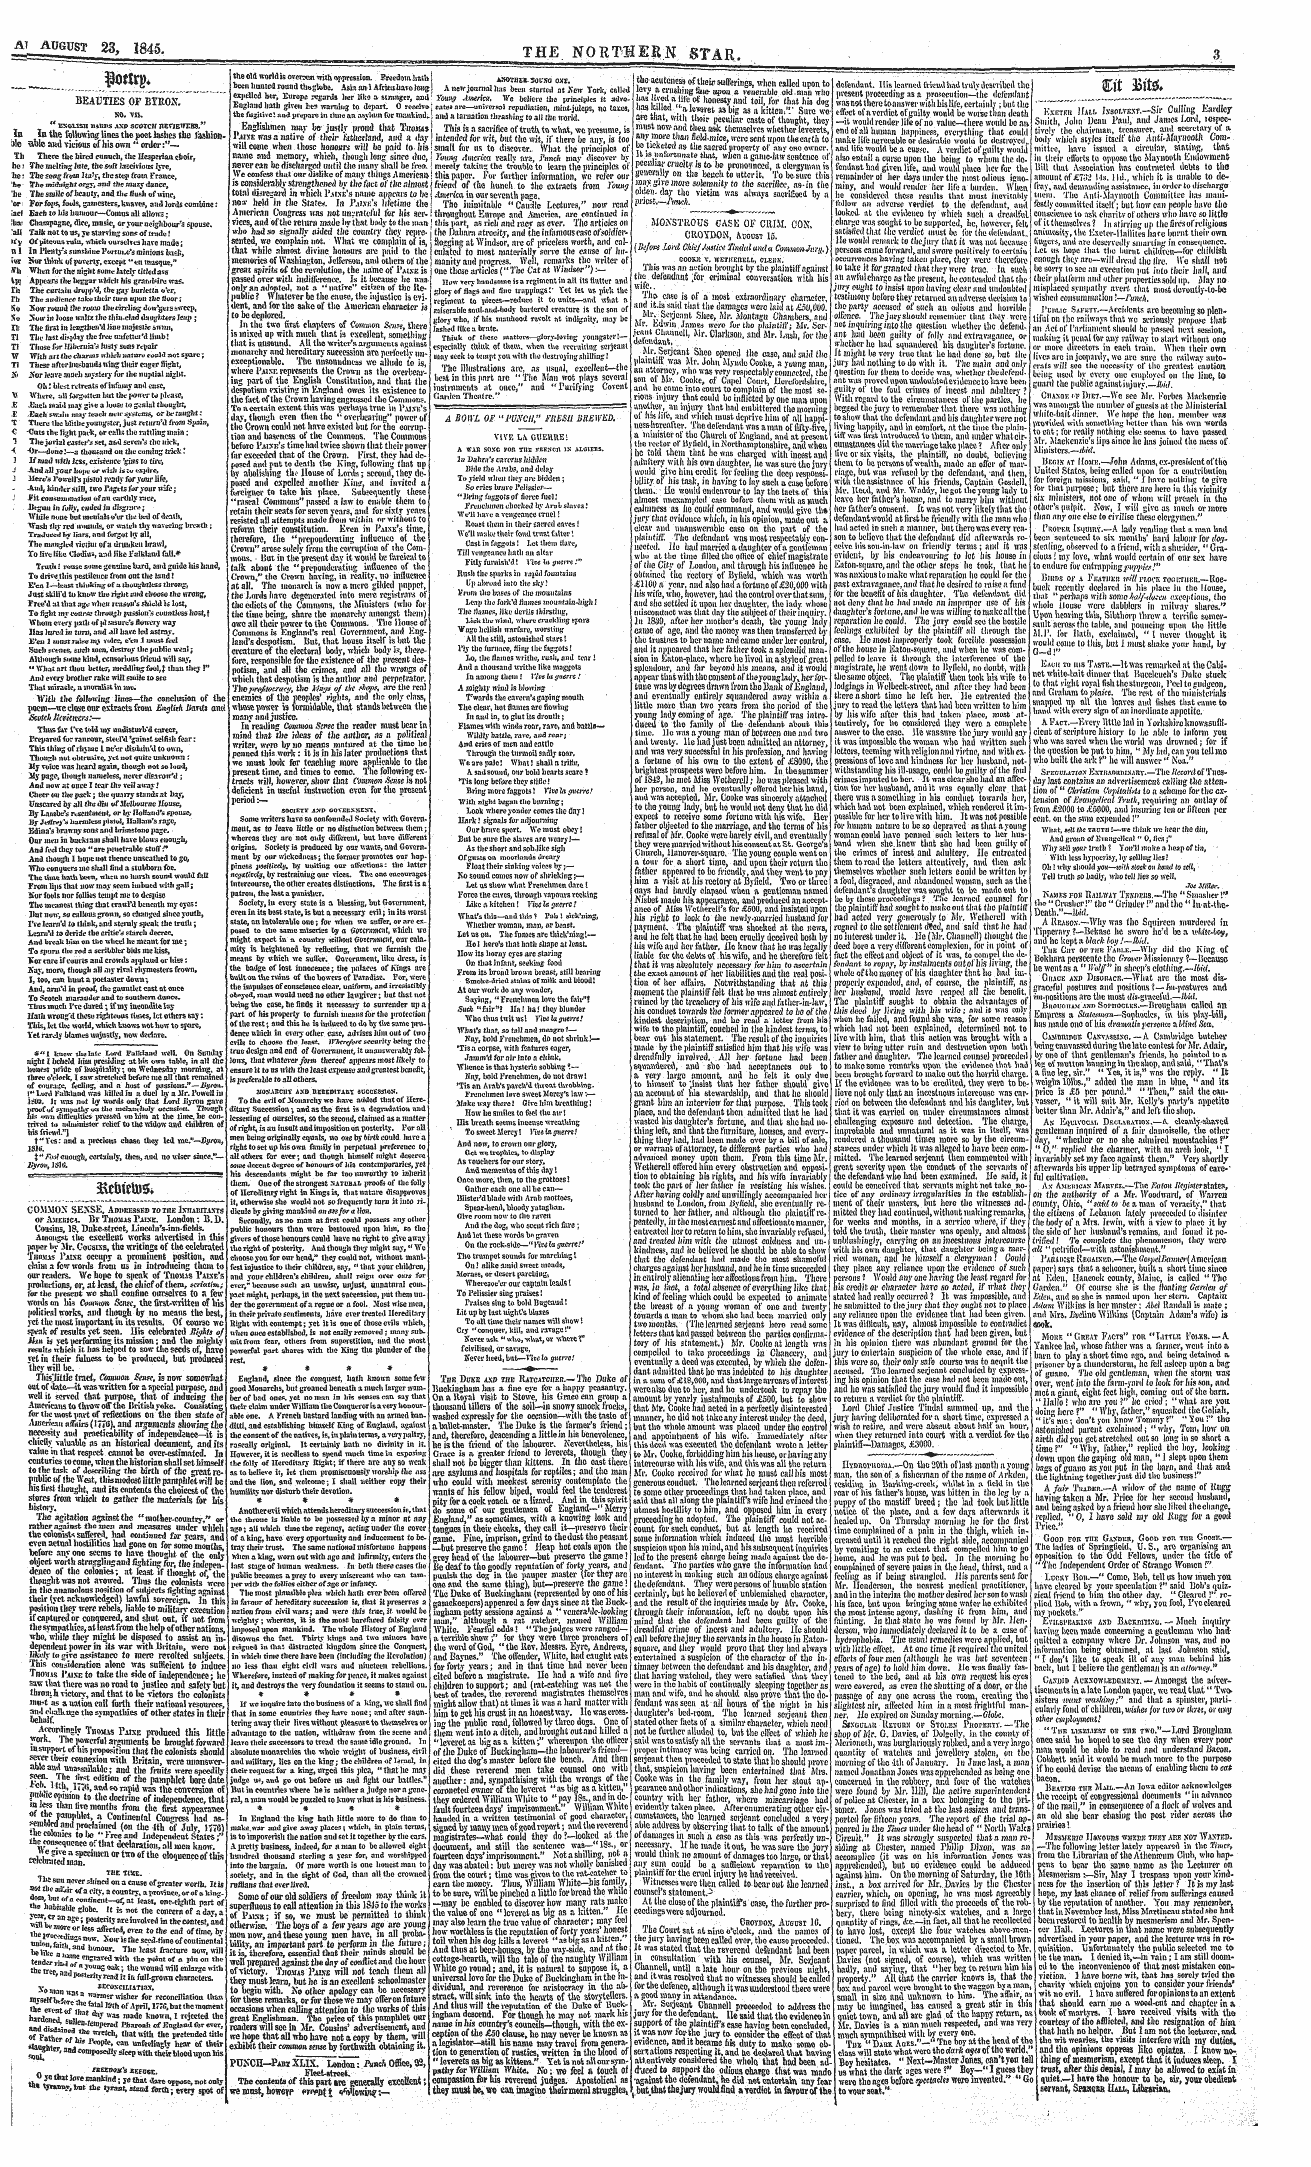 Northern Star (1837-1852): jS F Y, 3rd edition - _August 23, 1845. The Northern Star. 3